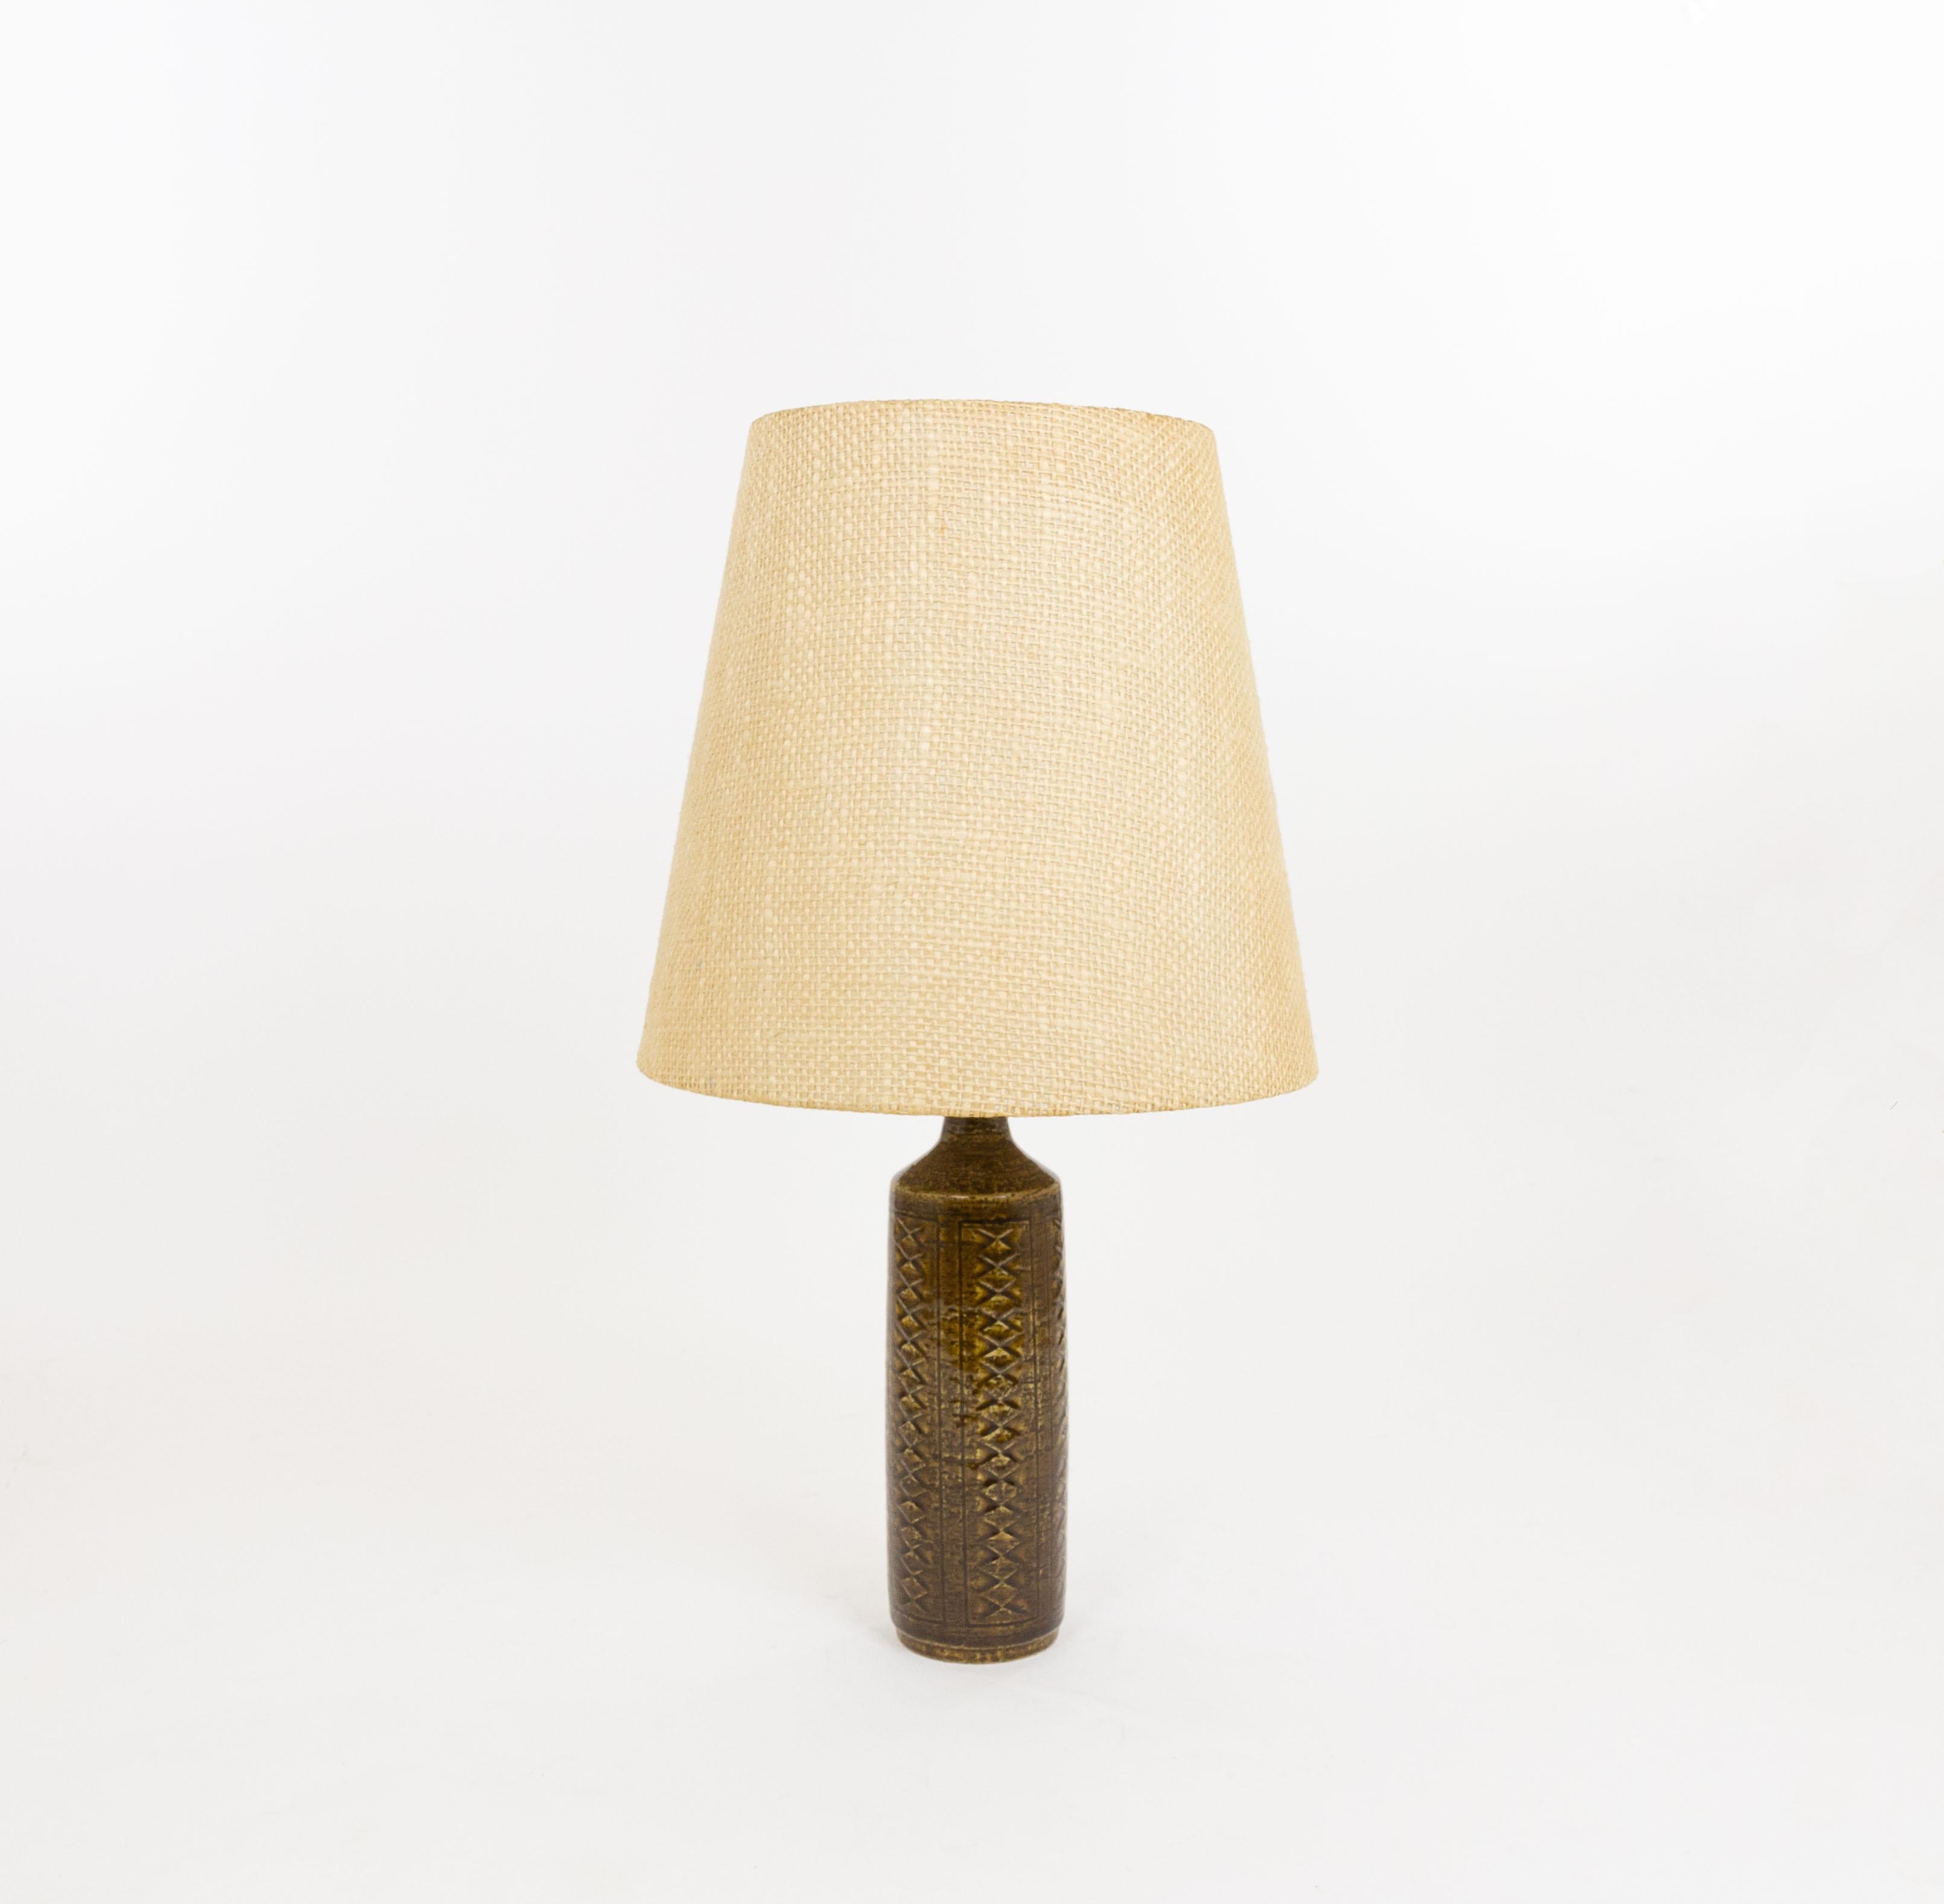 Model DL/27 table lamp made by Annelise and Per Linnemann-Schmidt for Palshus in the 1960s. The colour of the handmade decorated base is Chestnut Brown. It has impressed patterns.

The lamp comes with its original lampshade holder. The lampshade and